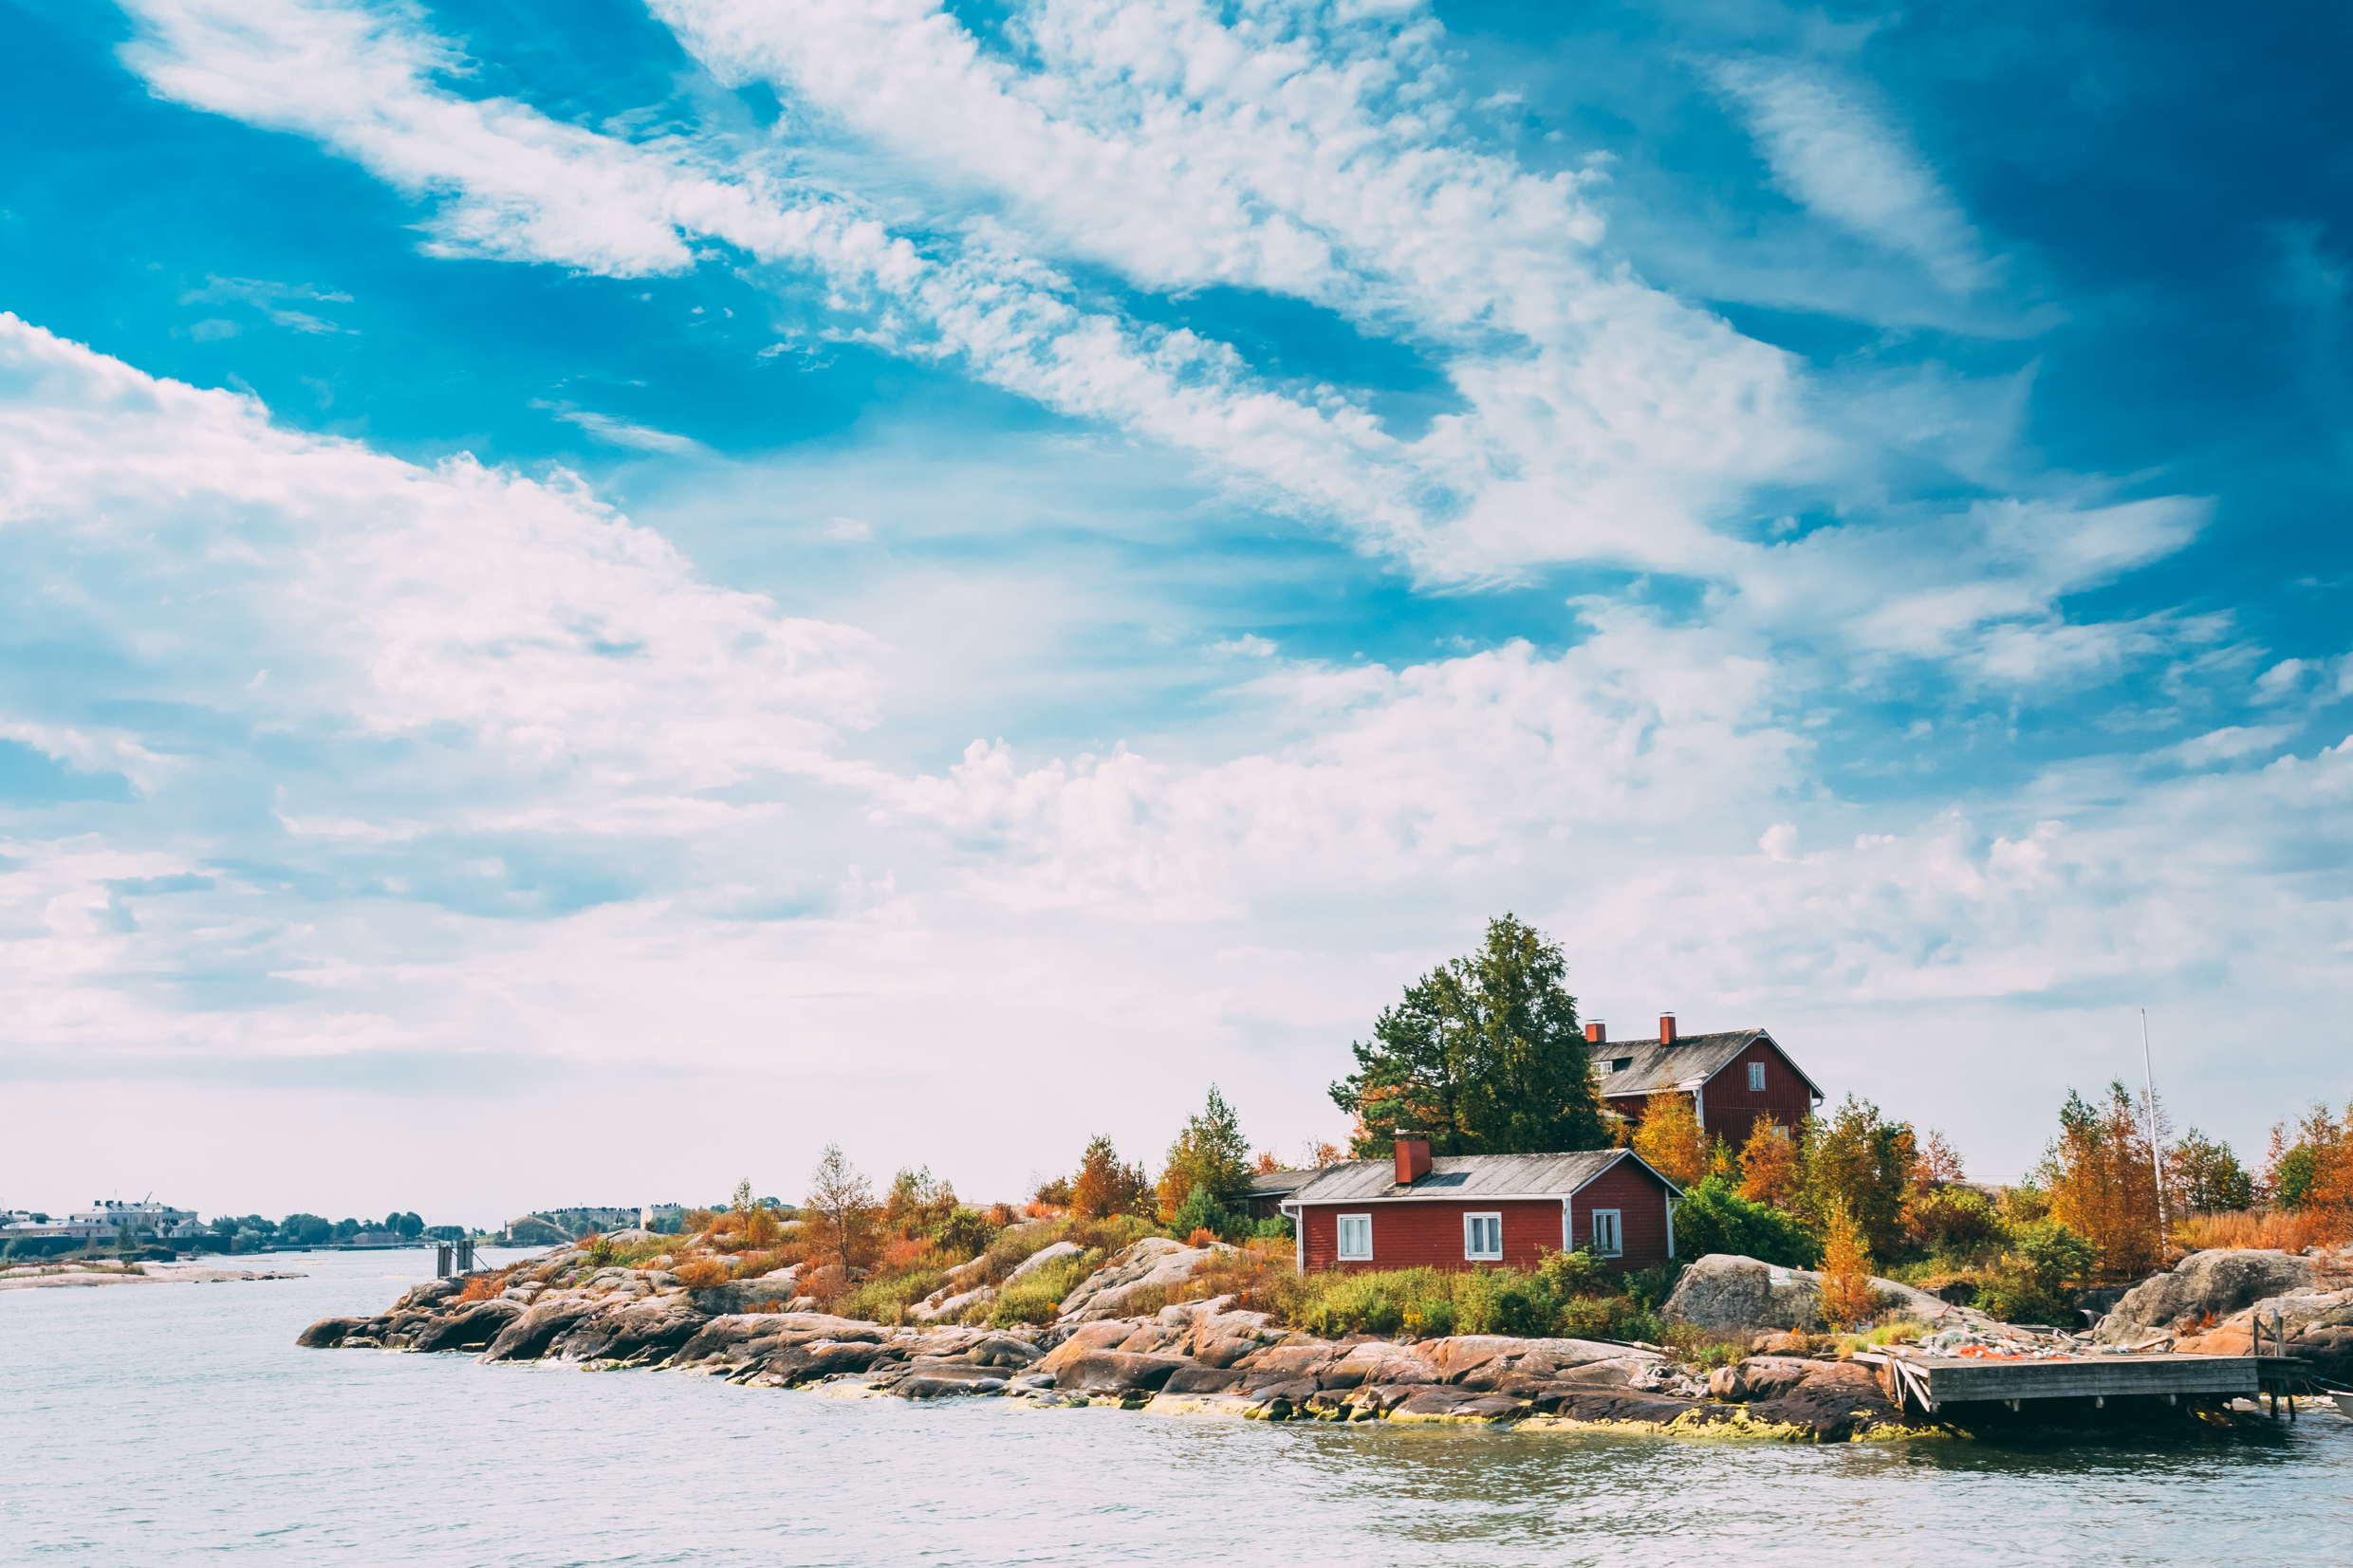 Finland, you can live in the country with a Finnish residence permit